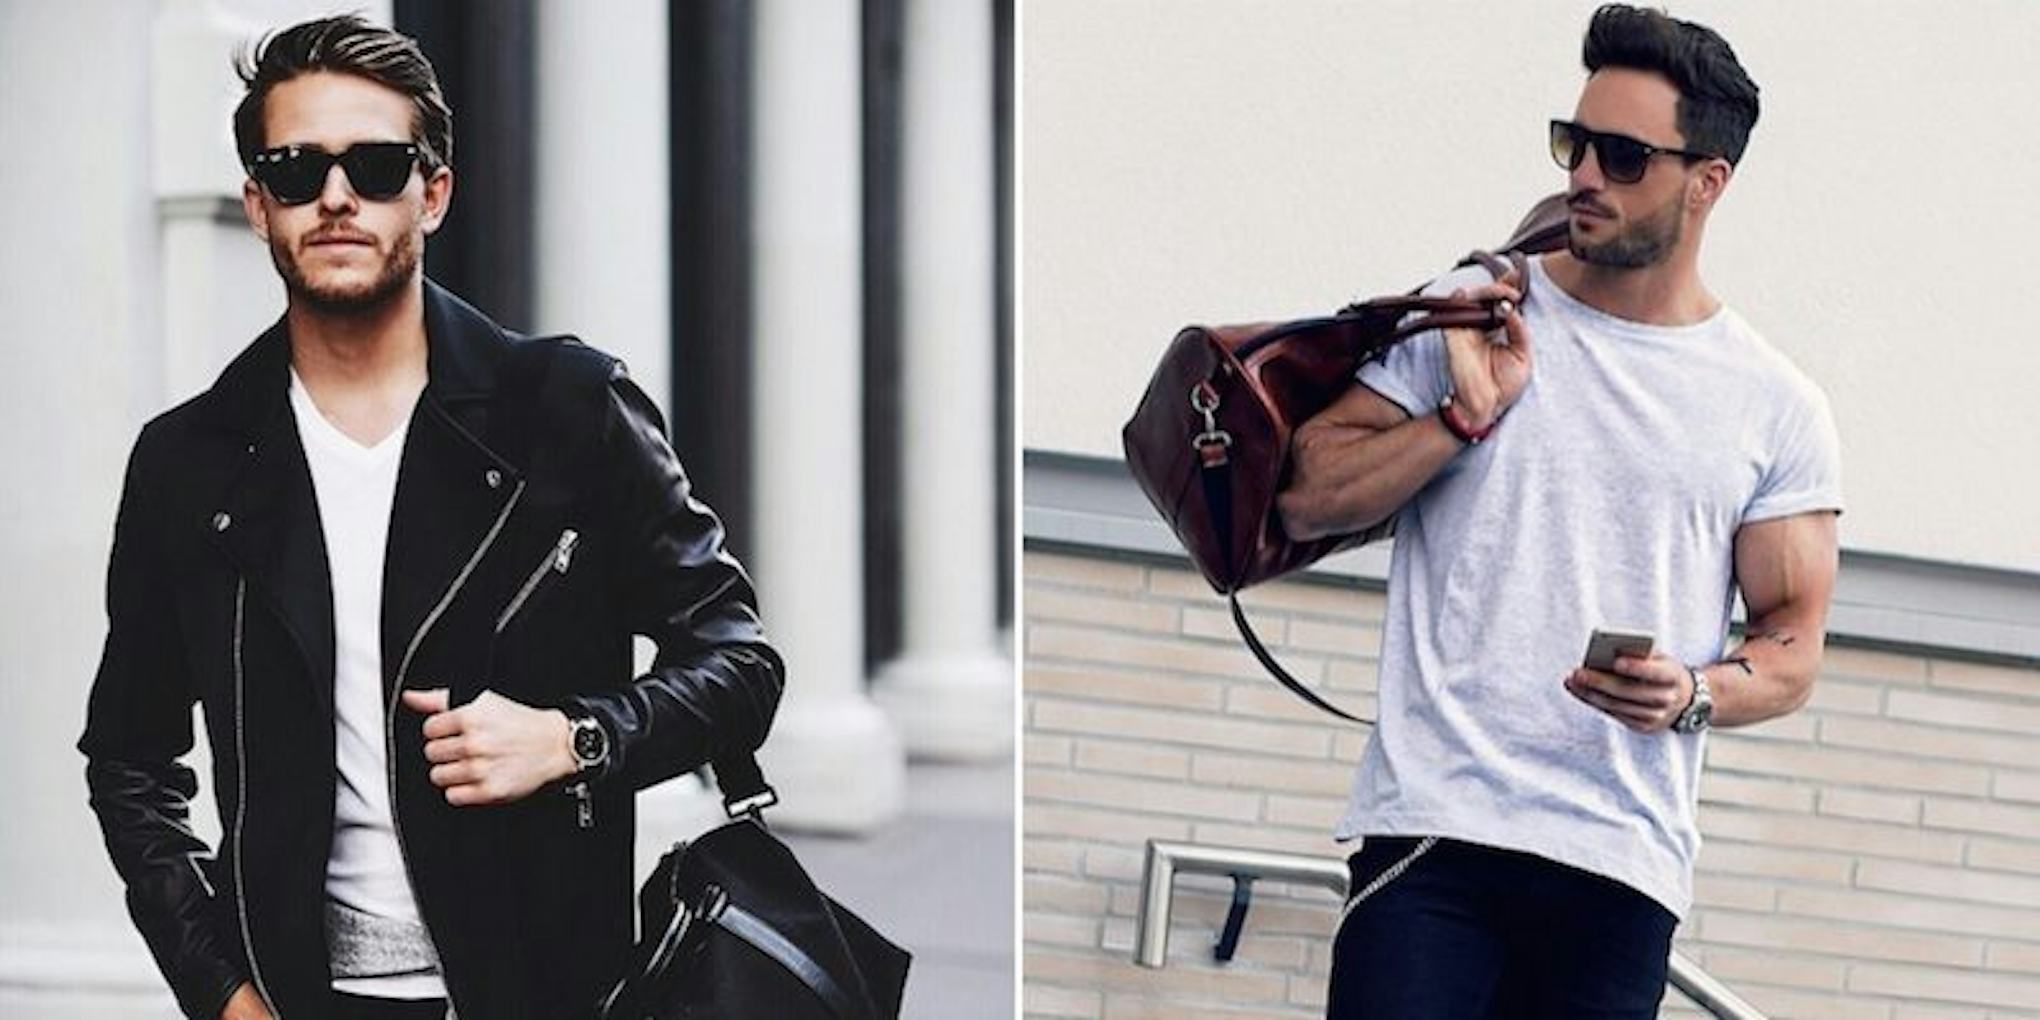 21 Ridiculously Hot Guys Who Are Totally Dominating The Man Purse Game